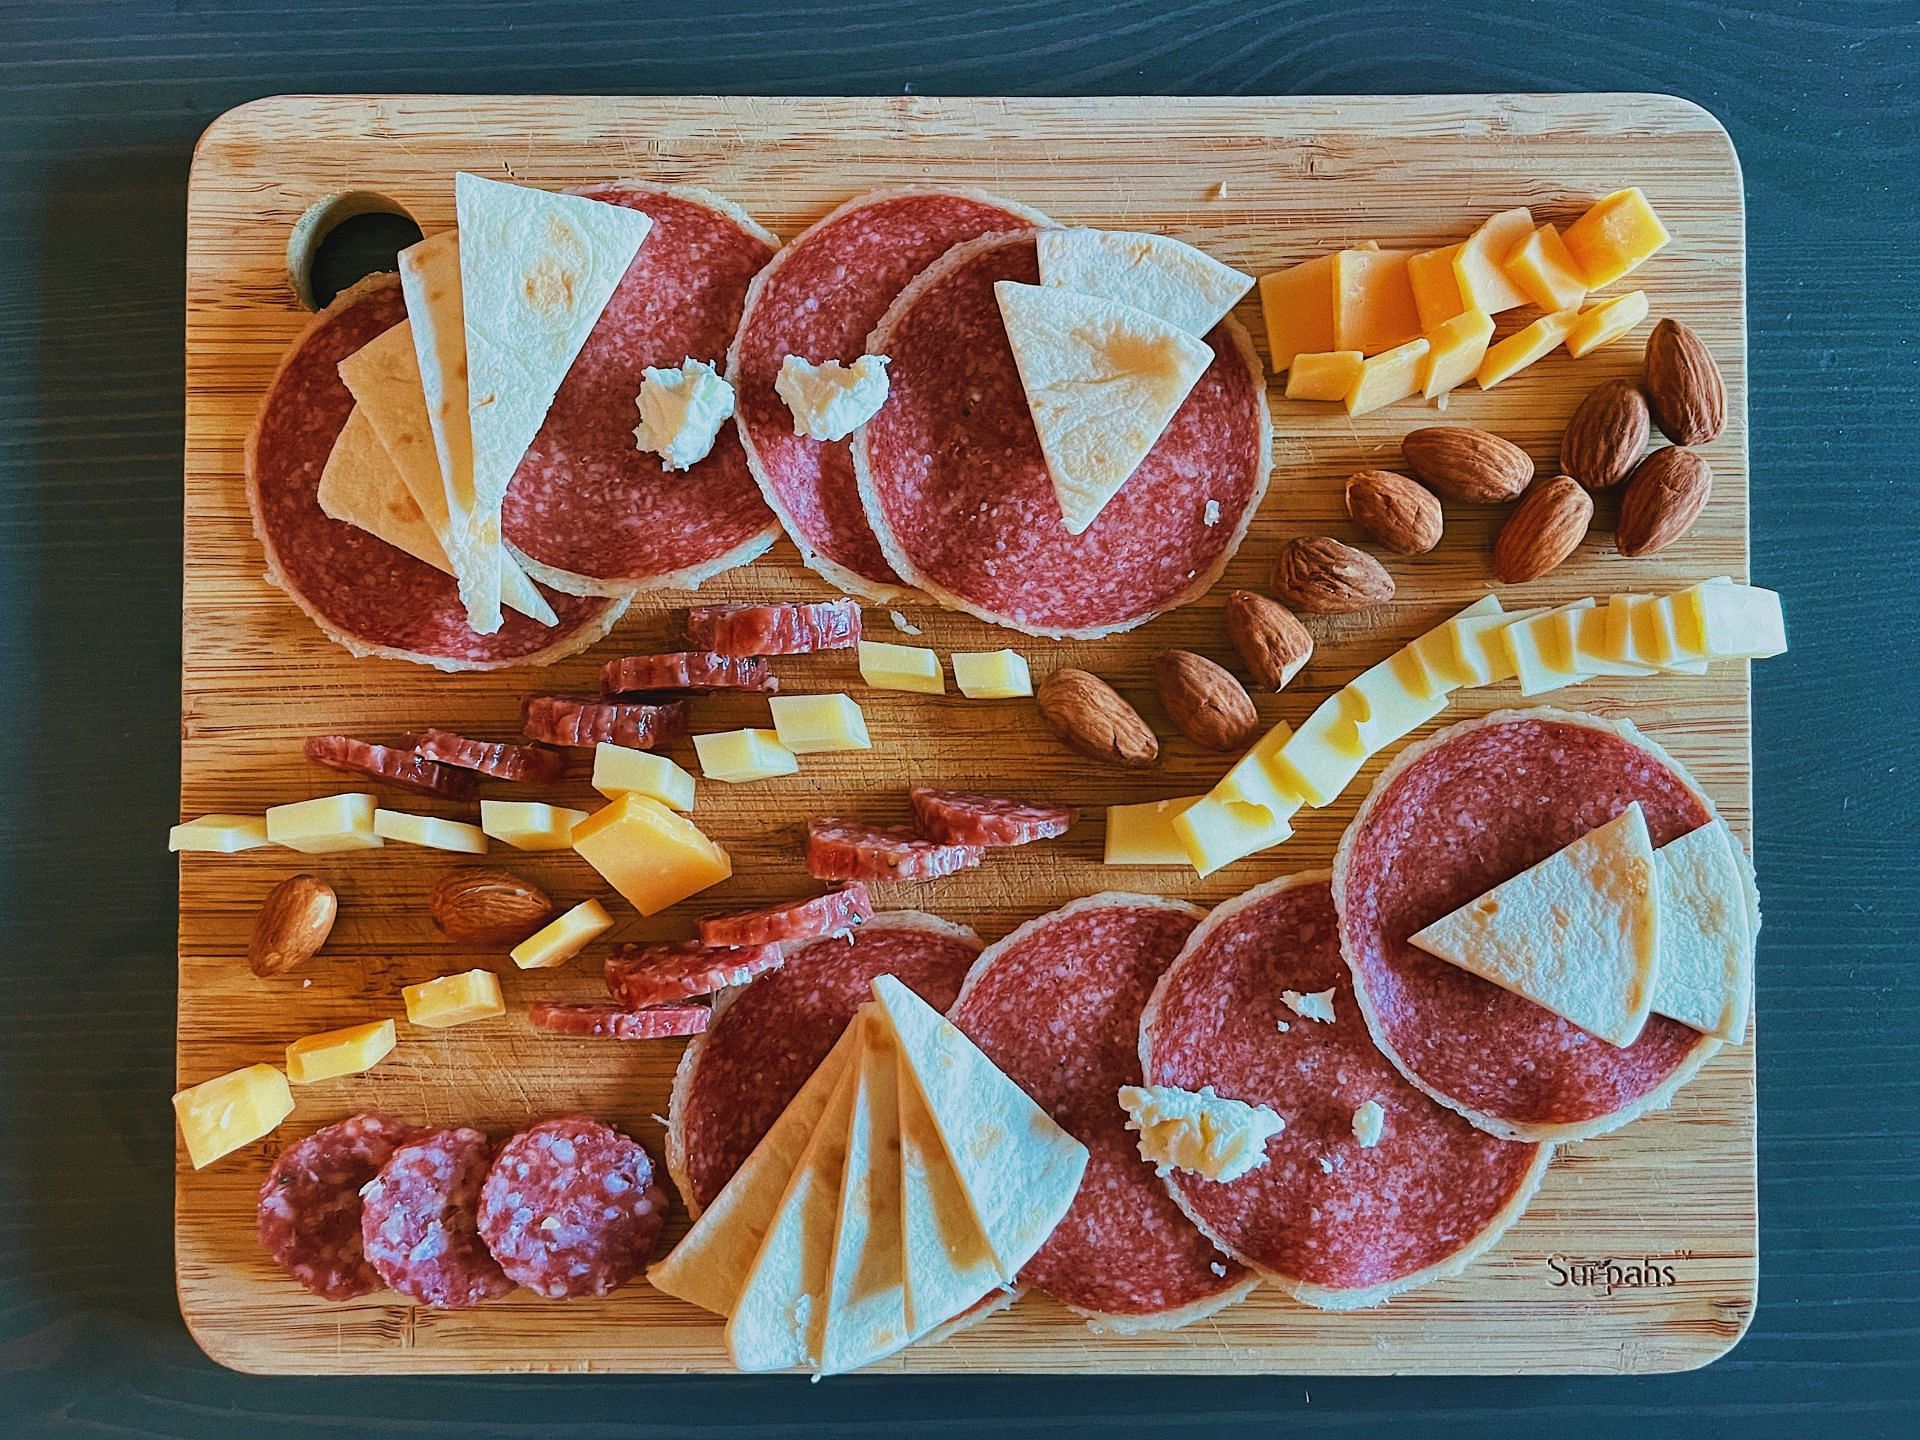 Salami for your breakfast (Image by Frank Zhang/Unsplash)